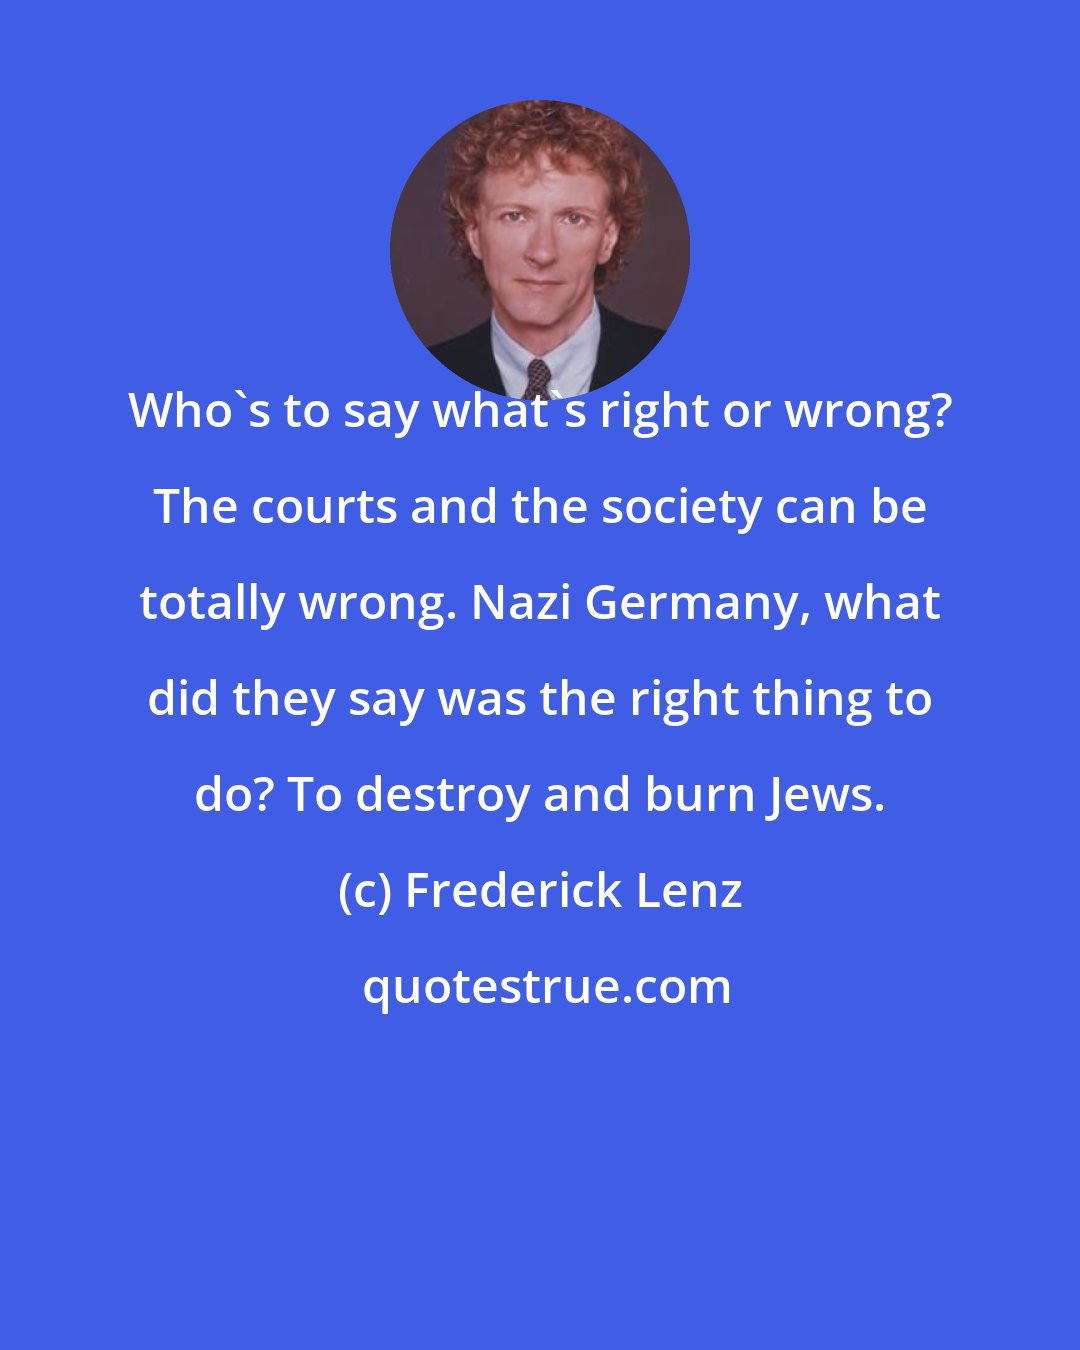 Frederick Lenz: Who's to say what's right or wrong? The courts and the society can be totally wrong. Nazi Germany, what did they say was the right thing to do? To destroy and burn Jews.